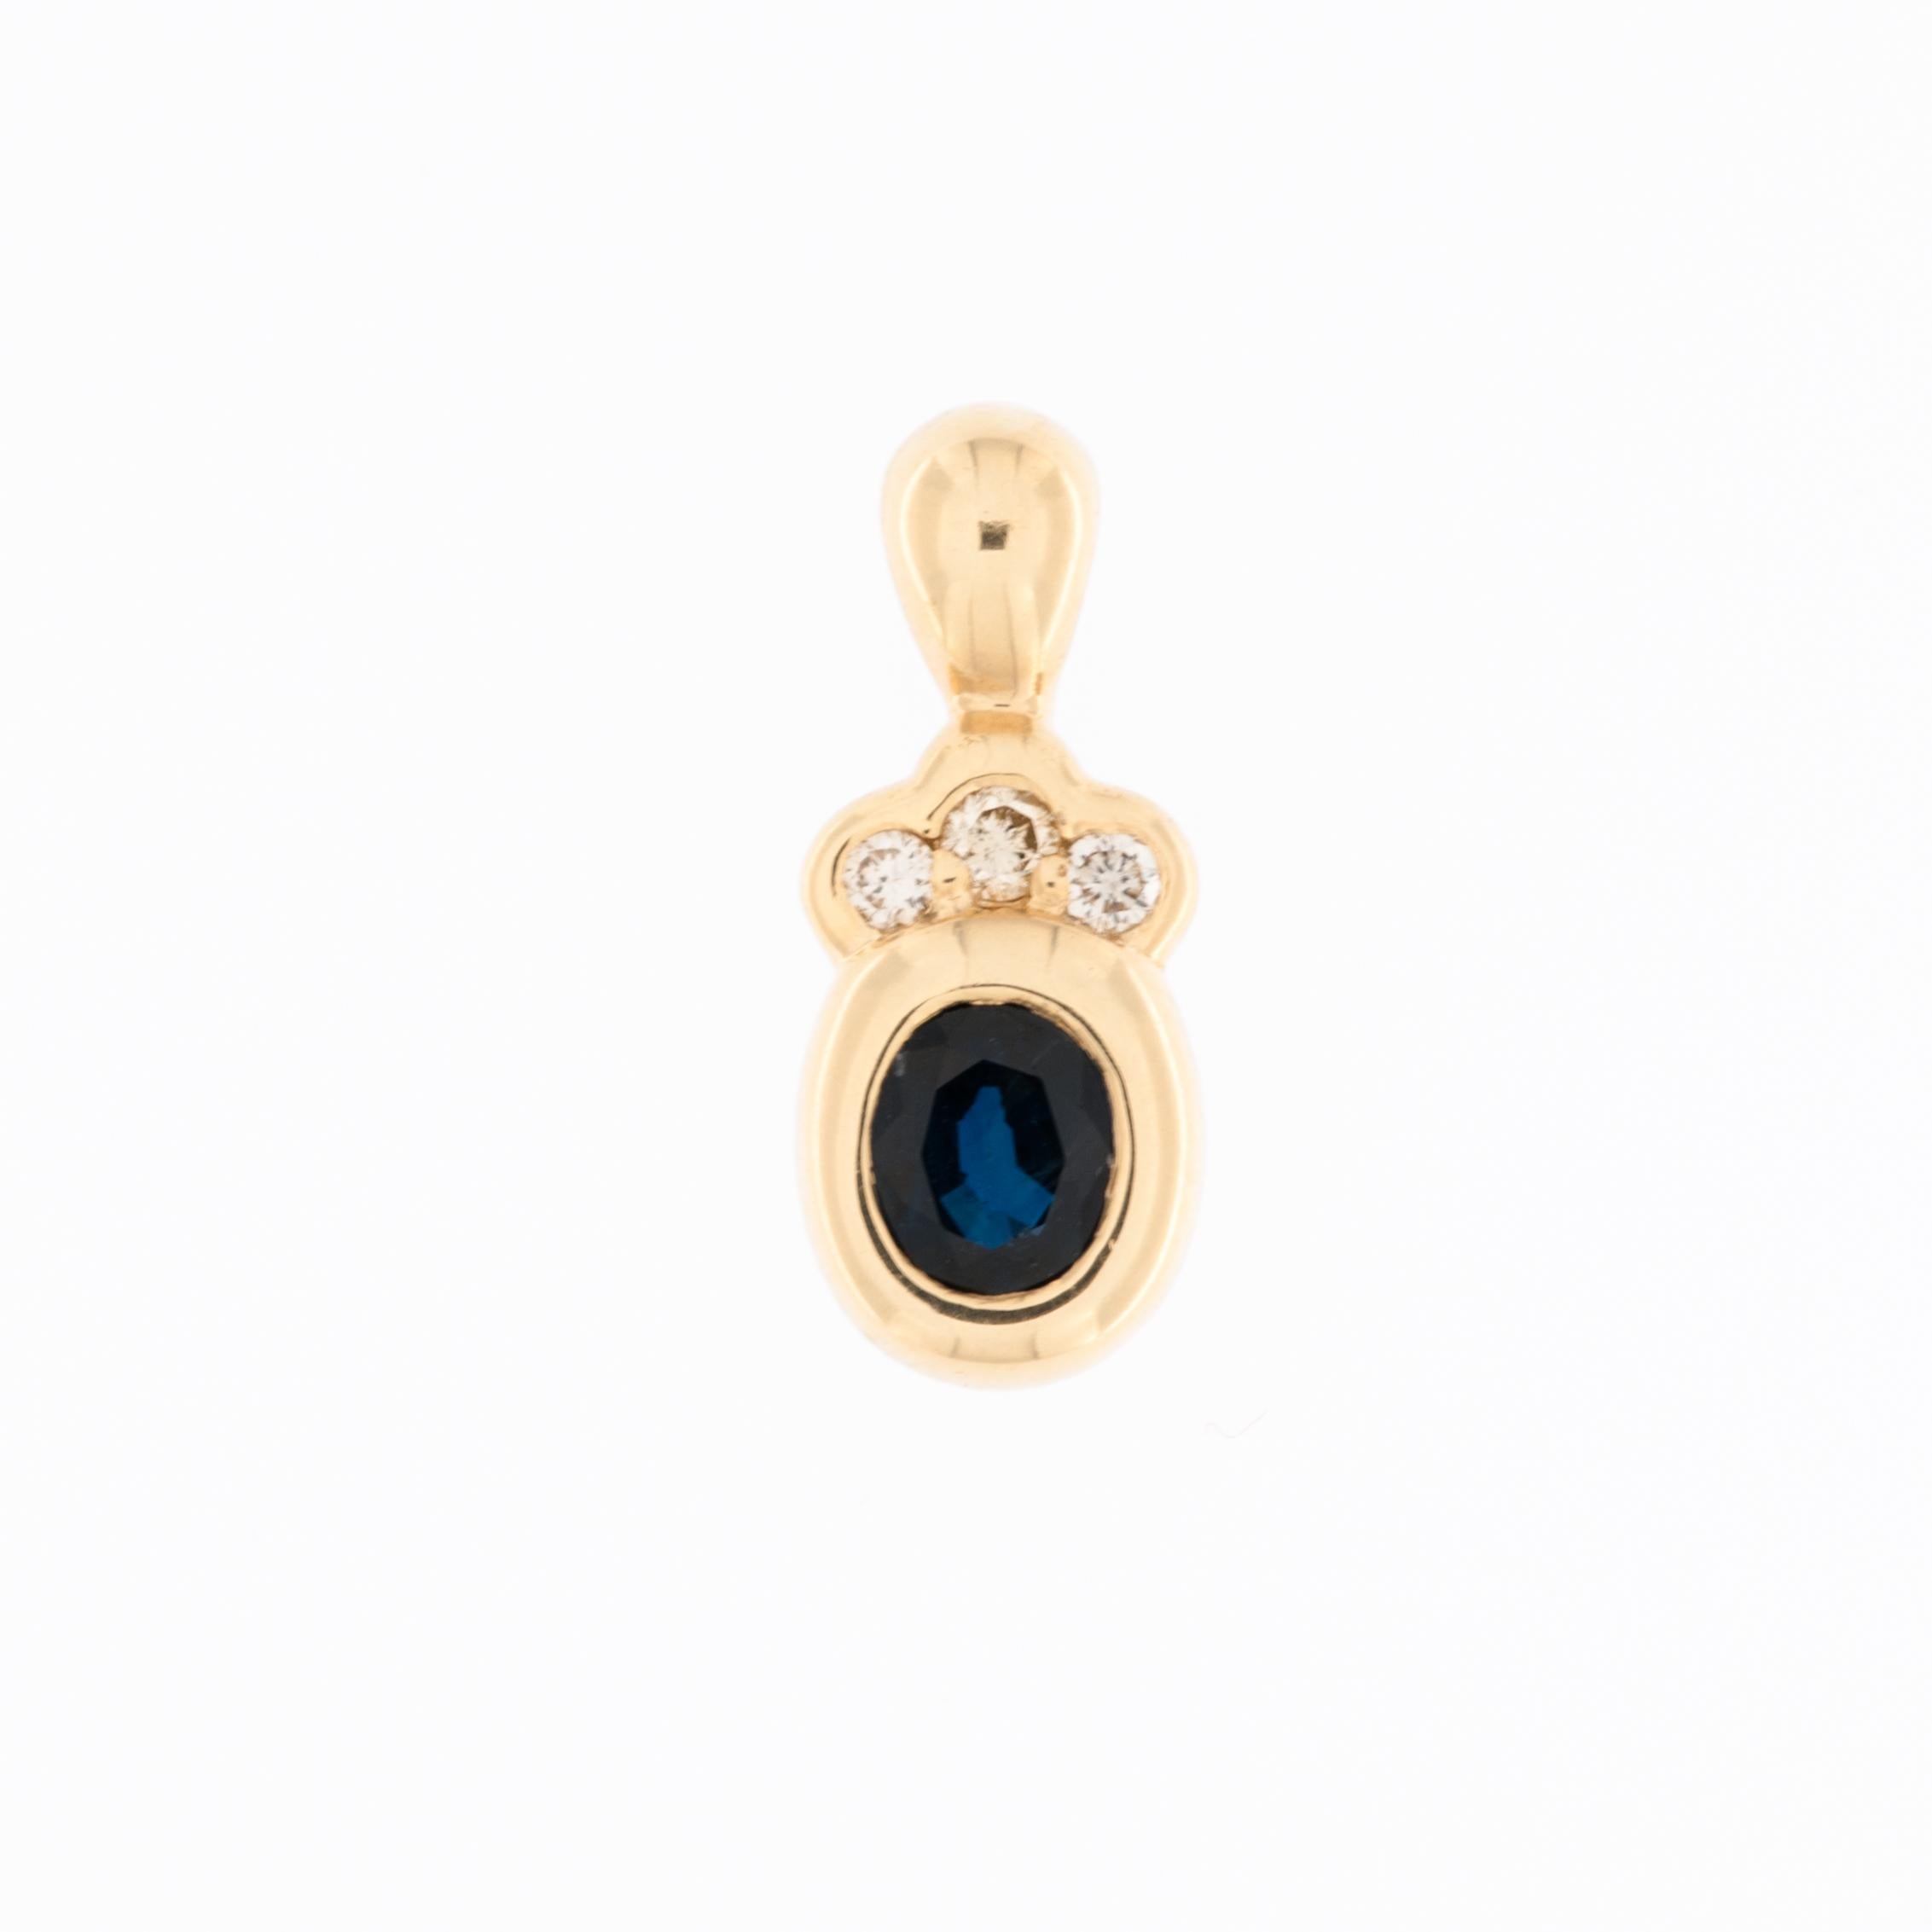 This vintage 18kt yellow gold pendant is a timeless and elegant piece of jewelry. The warm and rich hue of the 18kt yellow gold complements the design, adding a touch of sophistication. The pendant features a captivating 0.50ct oval-cut blue